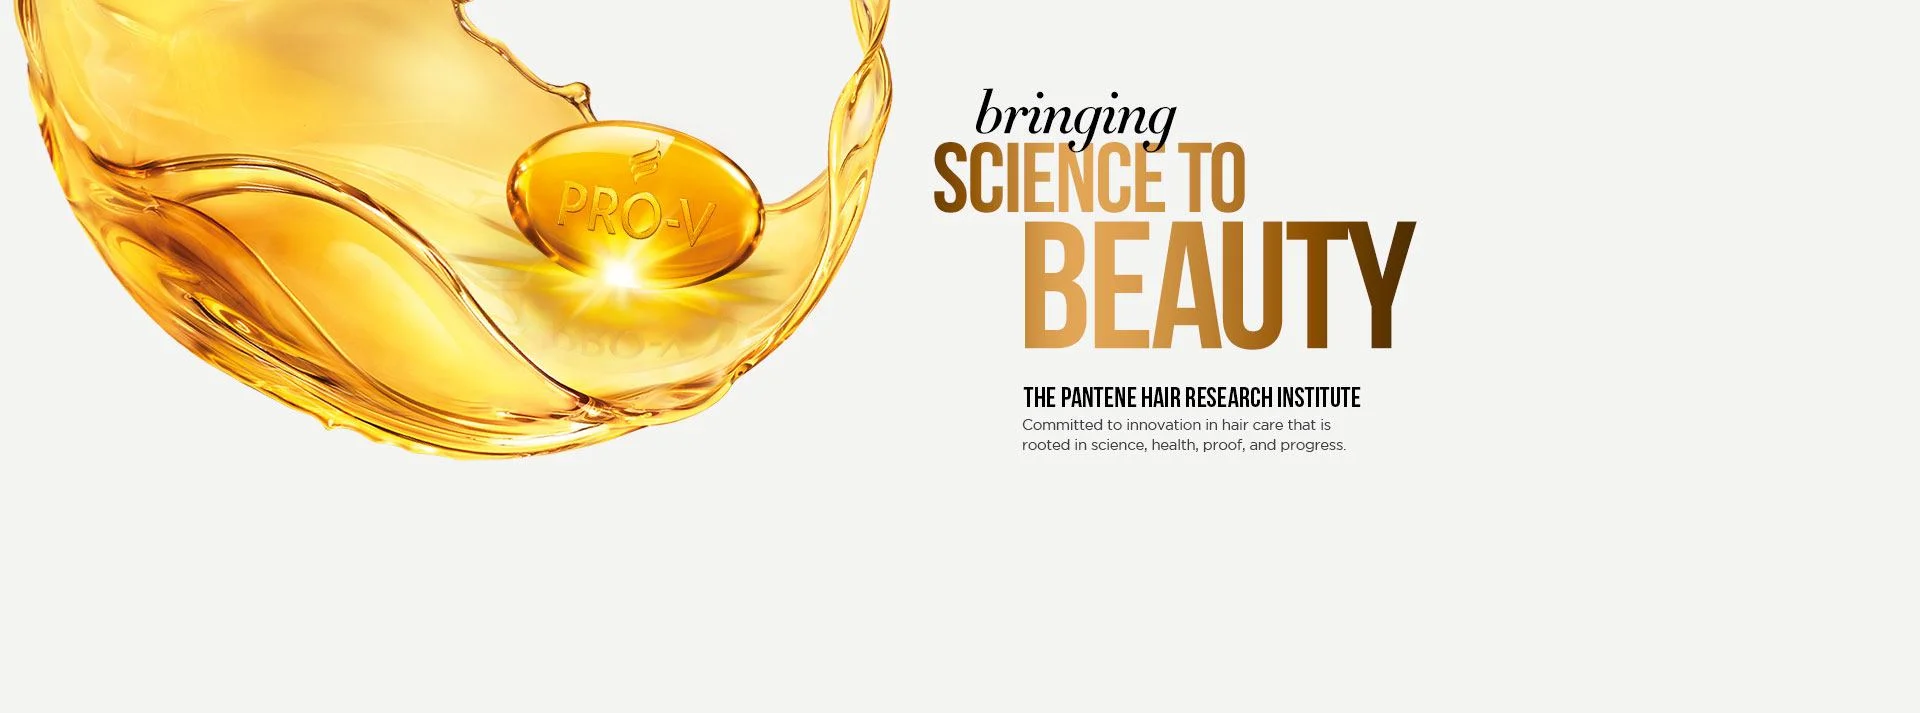 bringing science to beauty